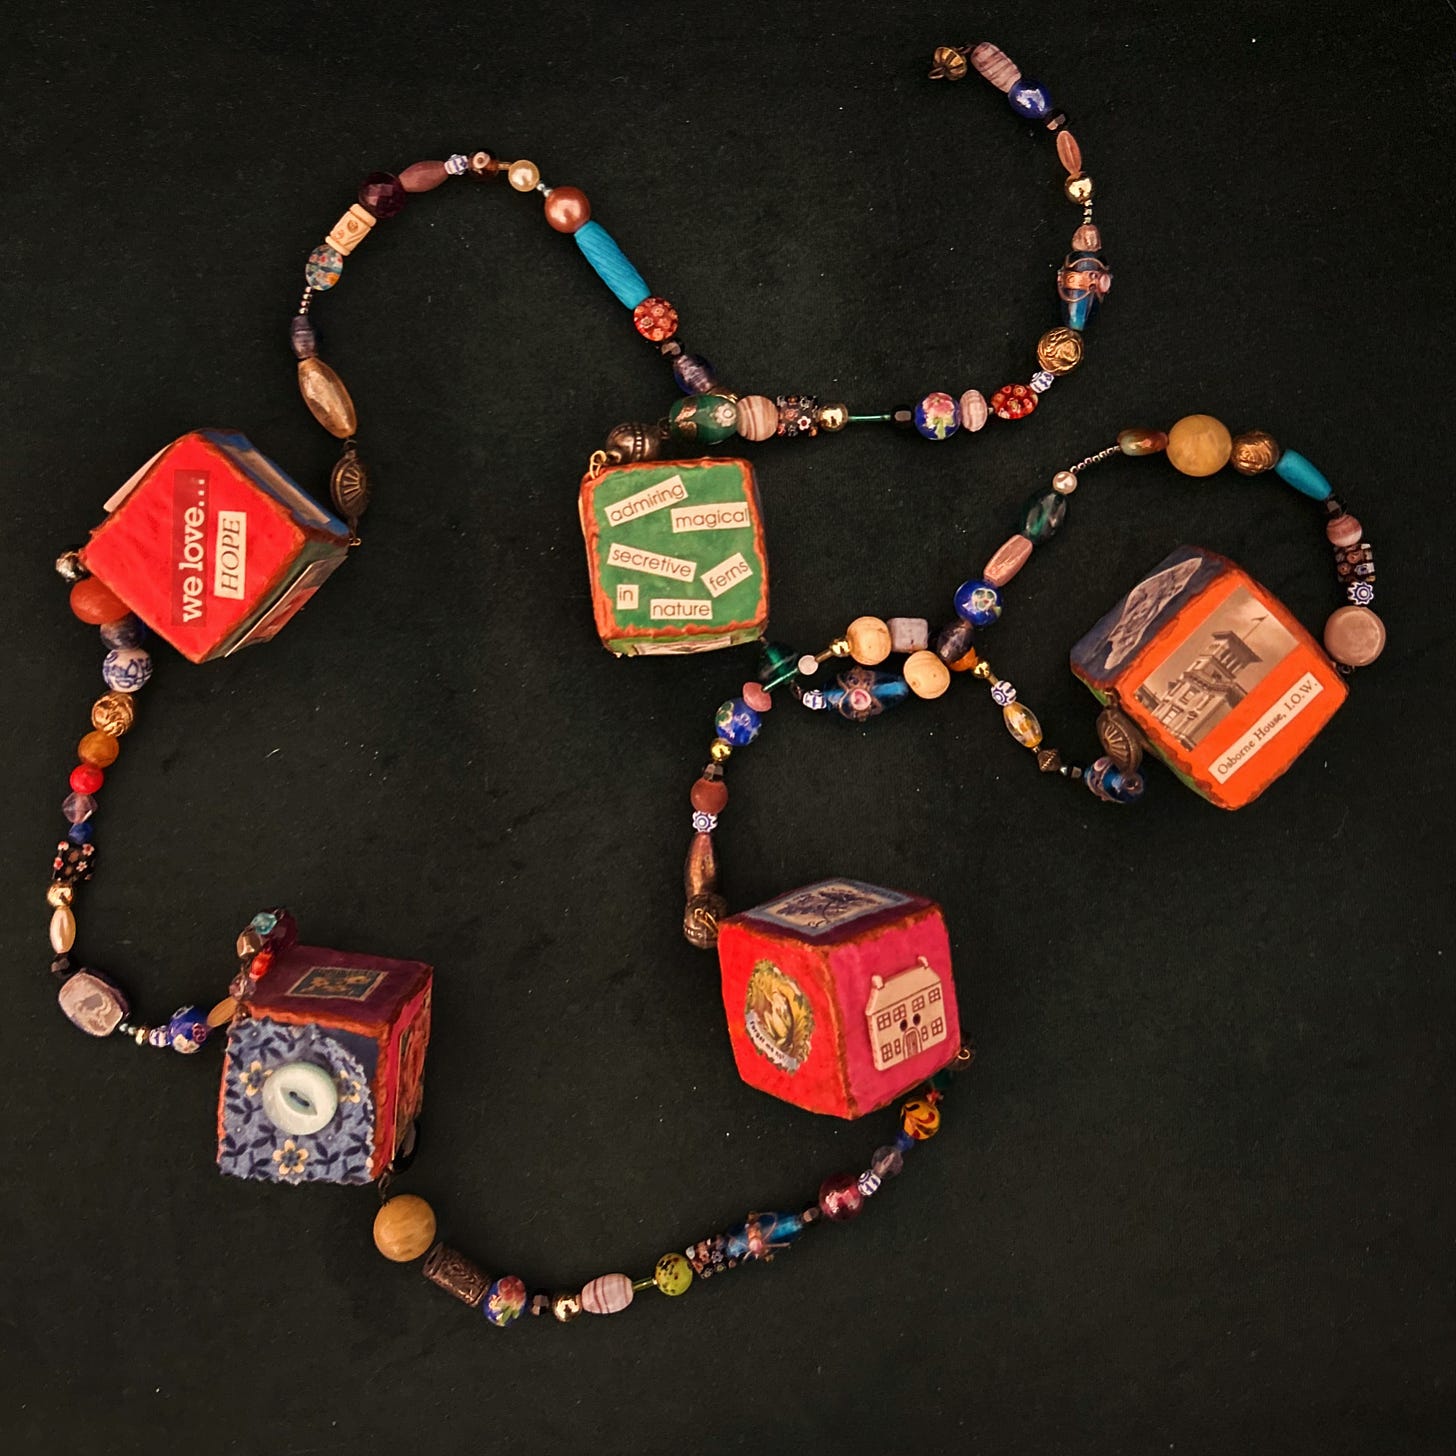 Five papier-mâché cubes joined together on beaded strings. The cubes are highly coloured and have images and text stuck to them.